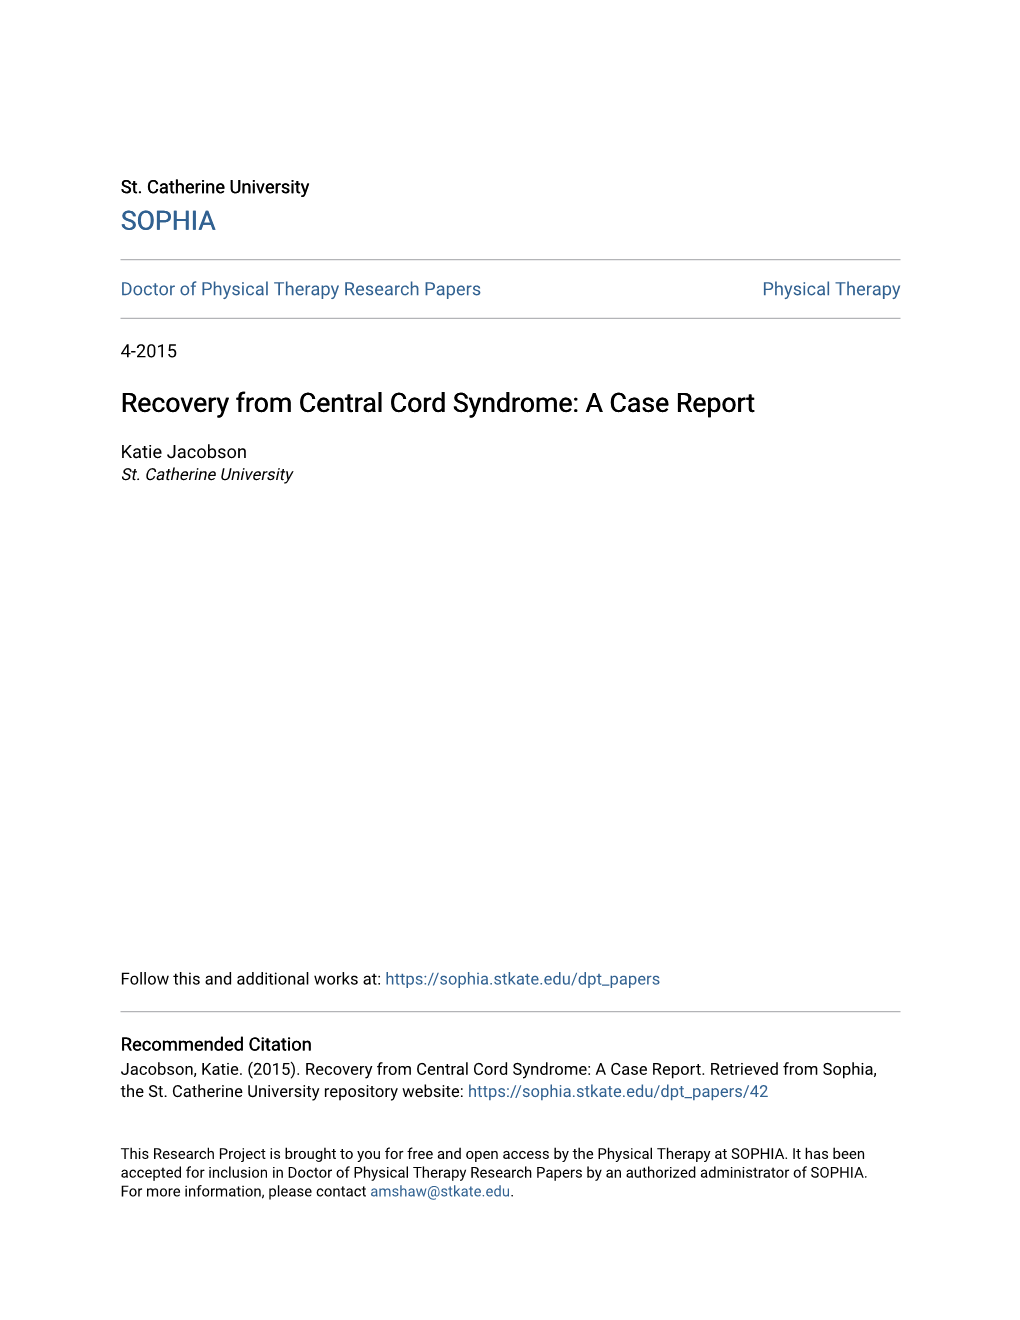 Recovery from Central Cord Syndrome: a Case Report